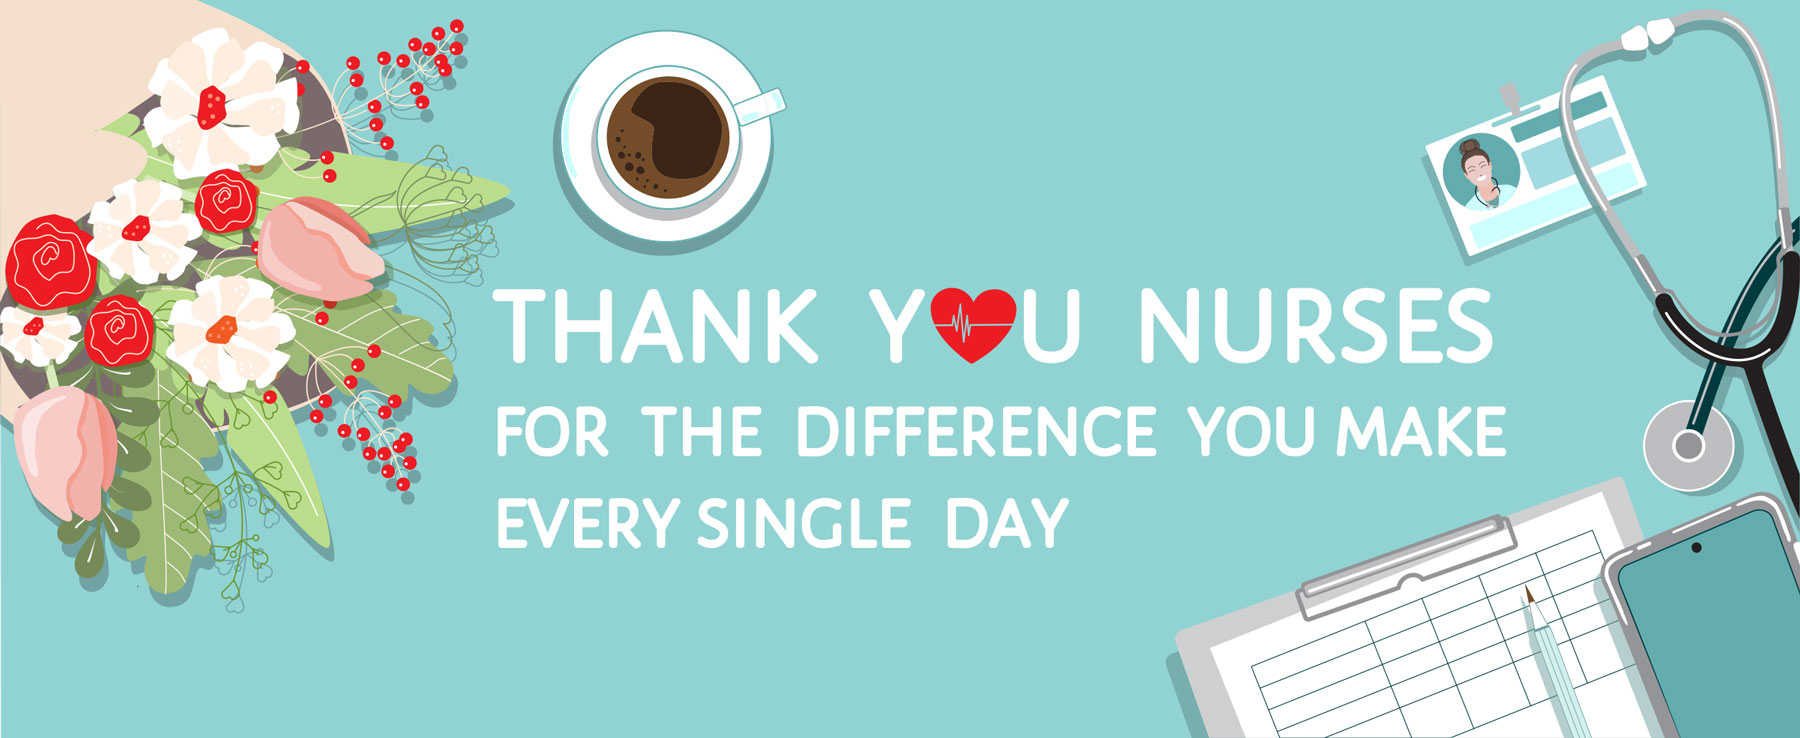 Nursing: Making a Difference Every Day!